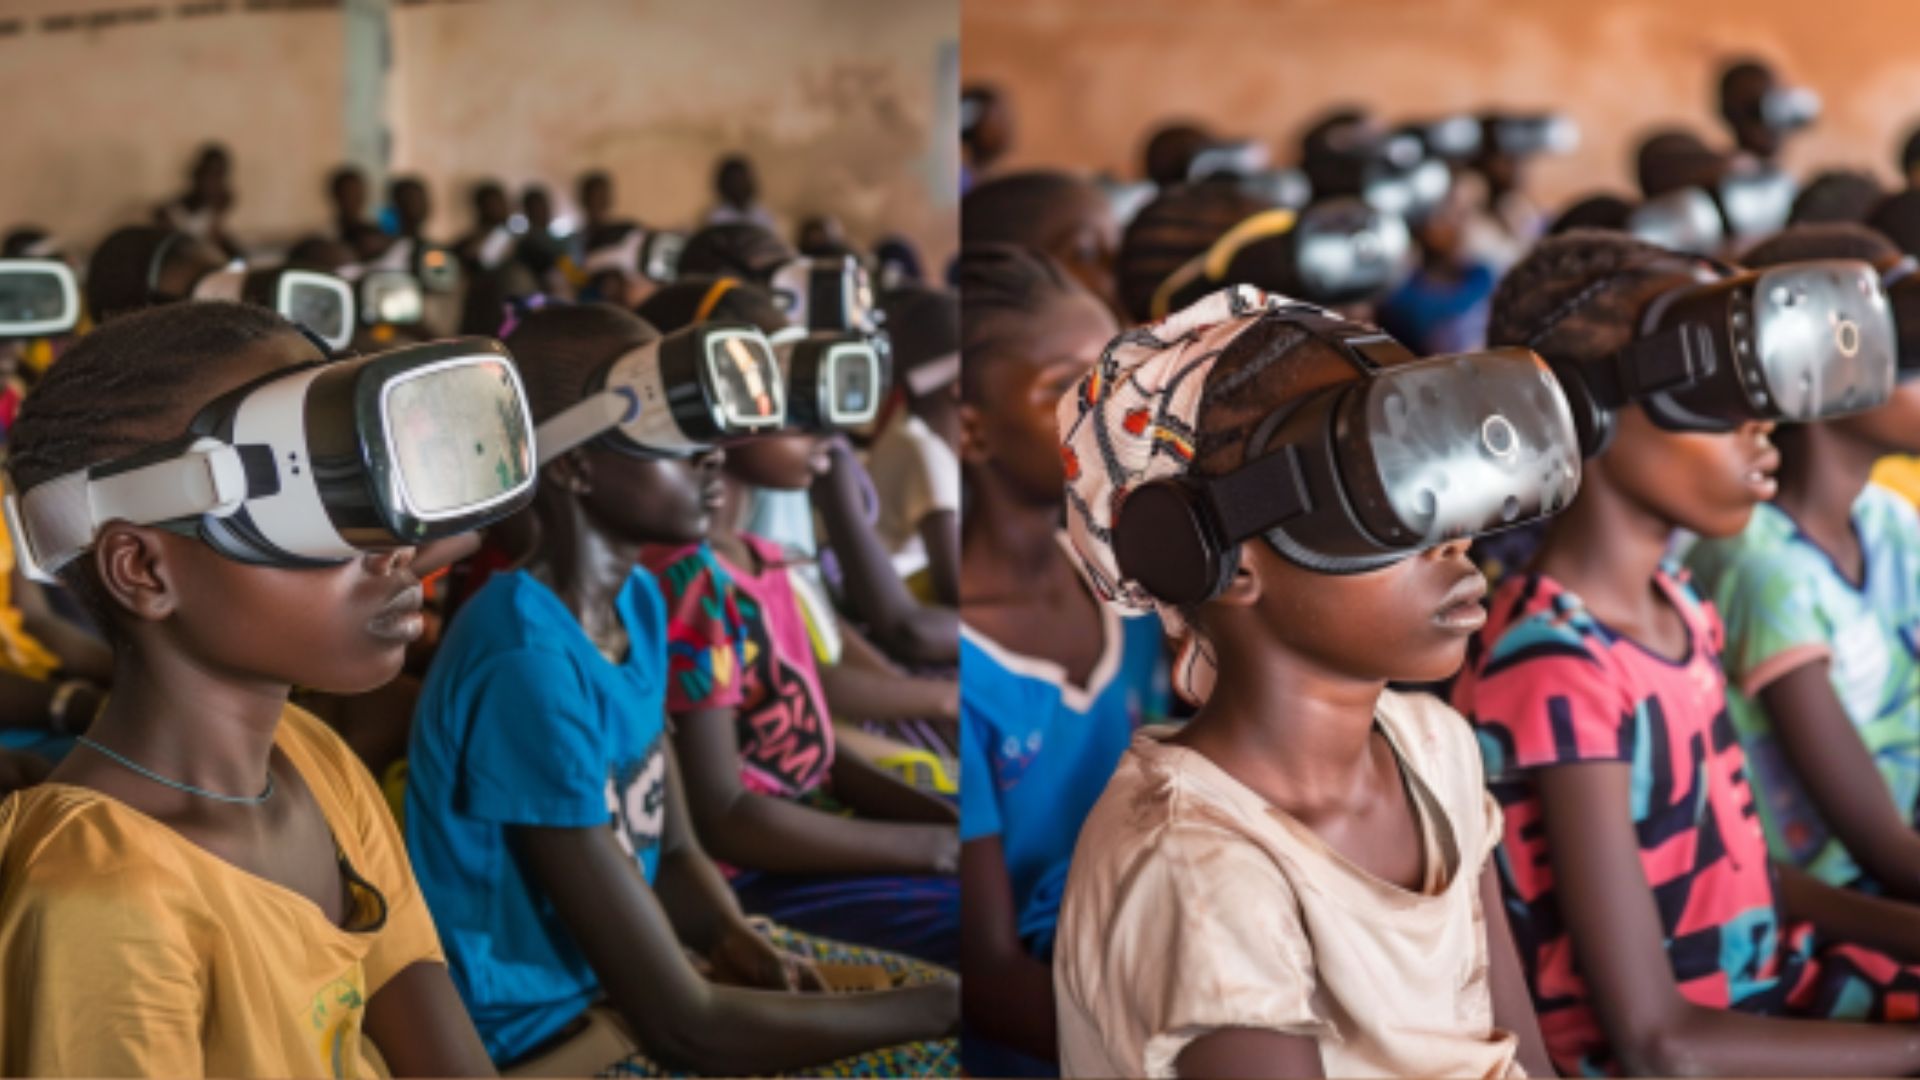 Empowering Burkina Faso’s Future: EON Reality Transforms Education with Immersive XR and AI Technologies